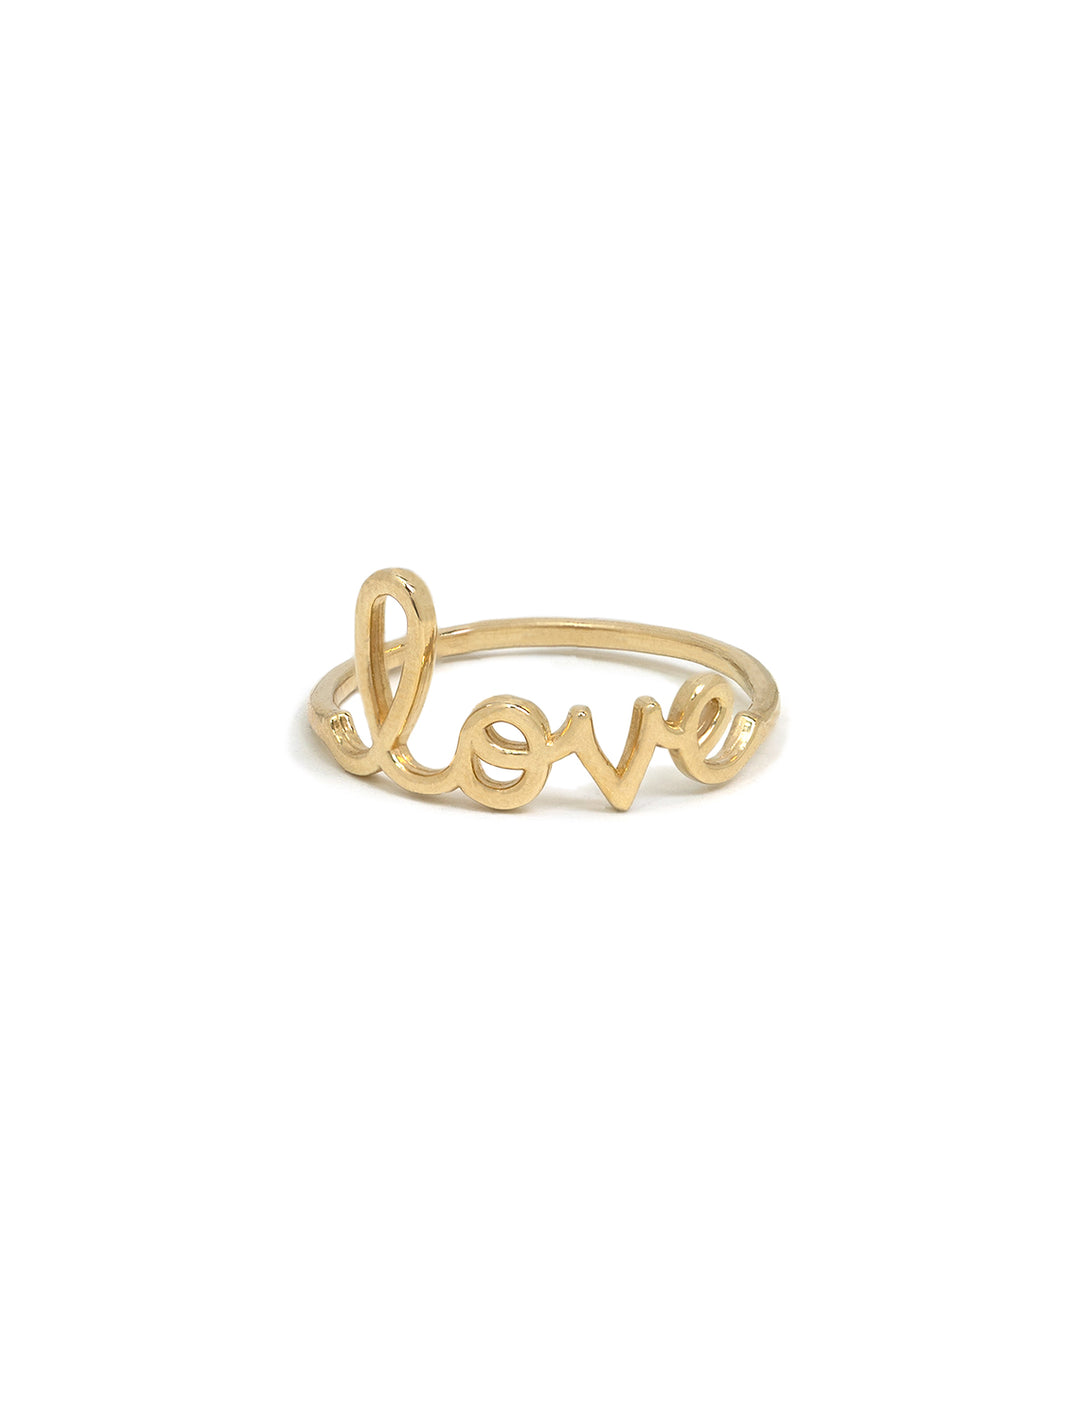 Front view of Sydney Evan's pure love ring.